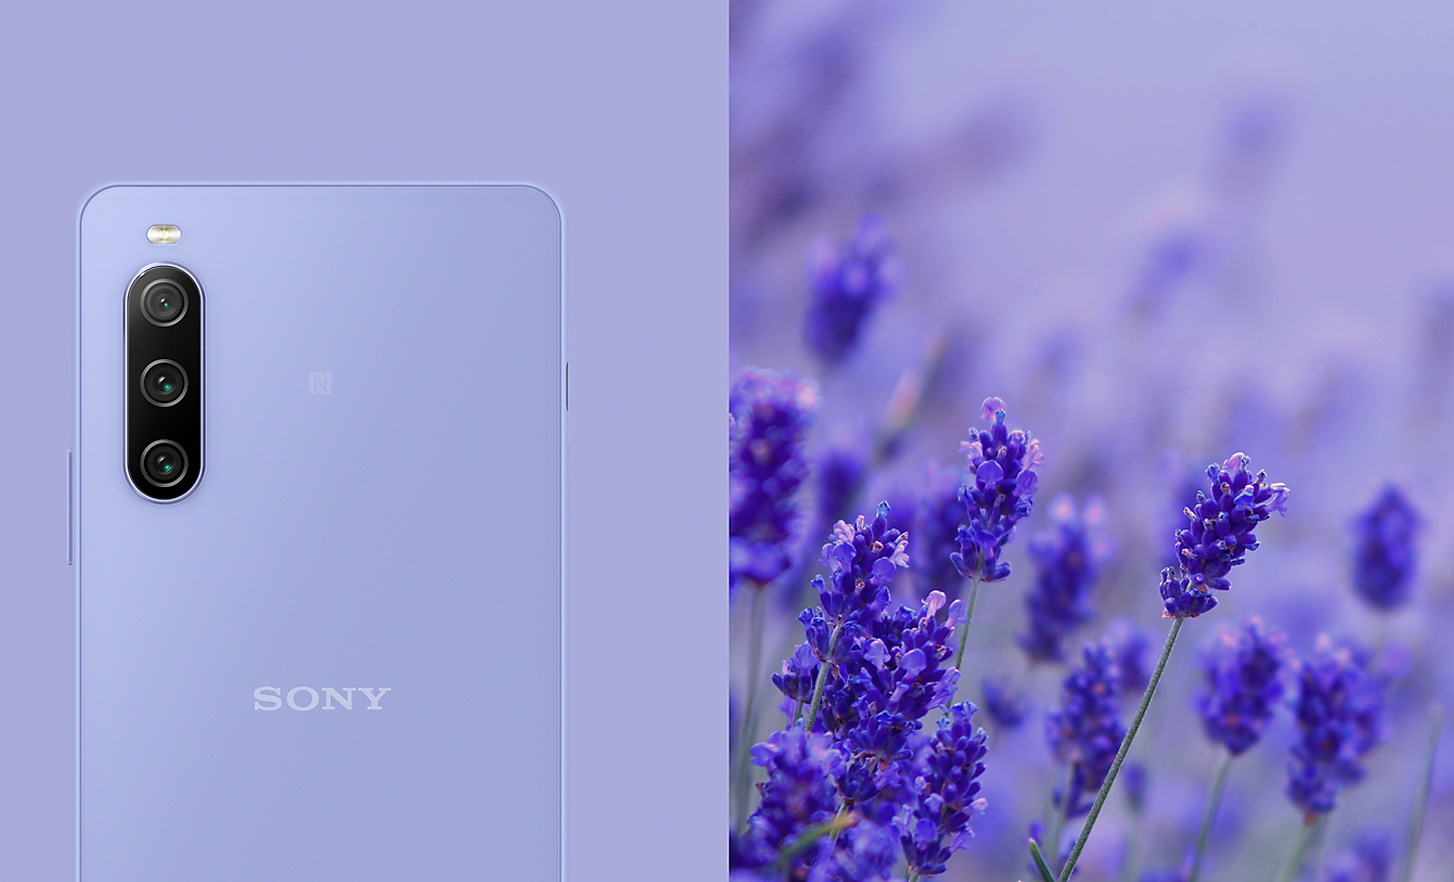 The Xperia 10 IV in lavender alongside an image of lavender flowers